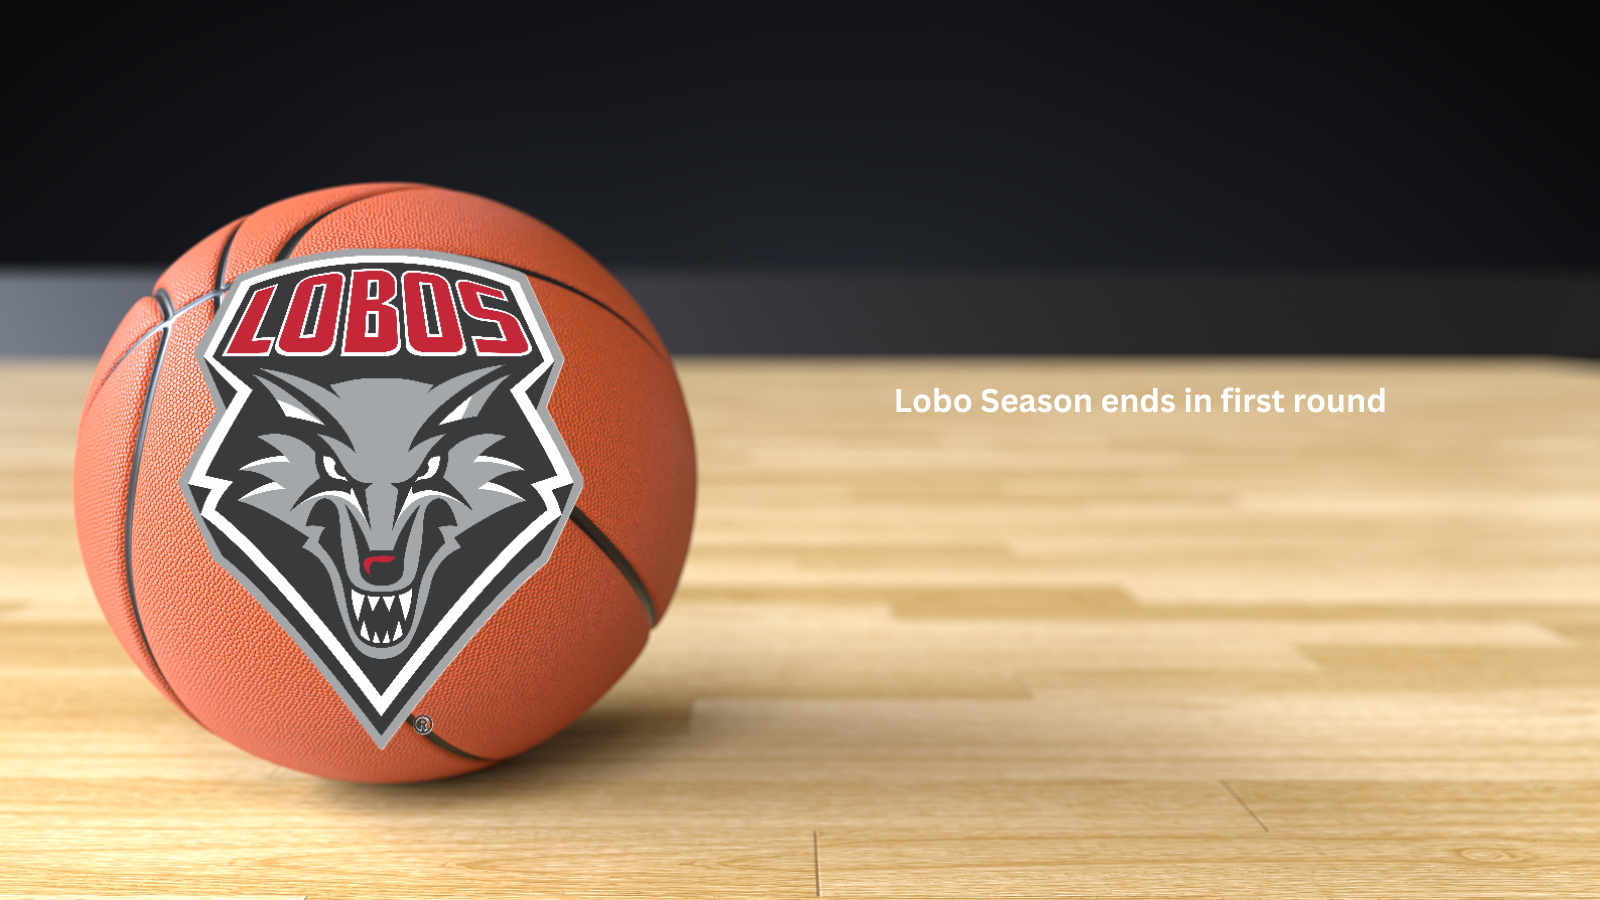 Lobos Exciting Season Ends in Round 1 of NCAA Tournament